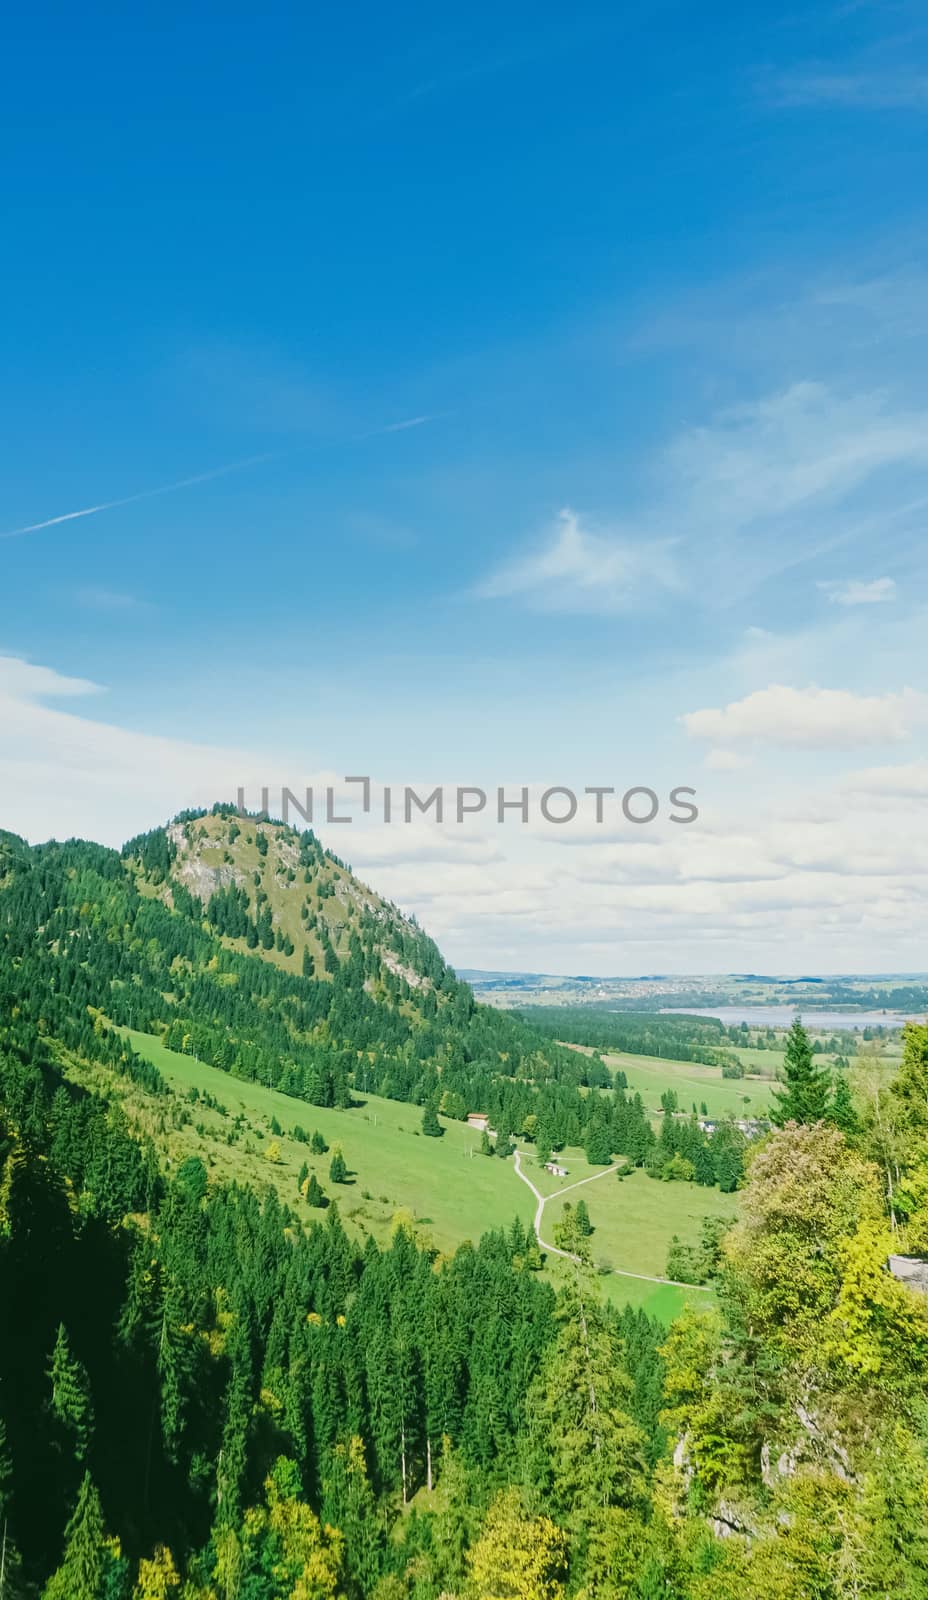 Beautiful nature of European Alps, landscape view of alpine mountains, lake and village in spring season, travel and destination scenery